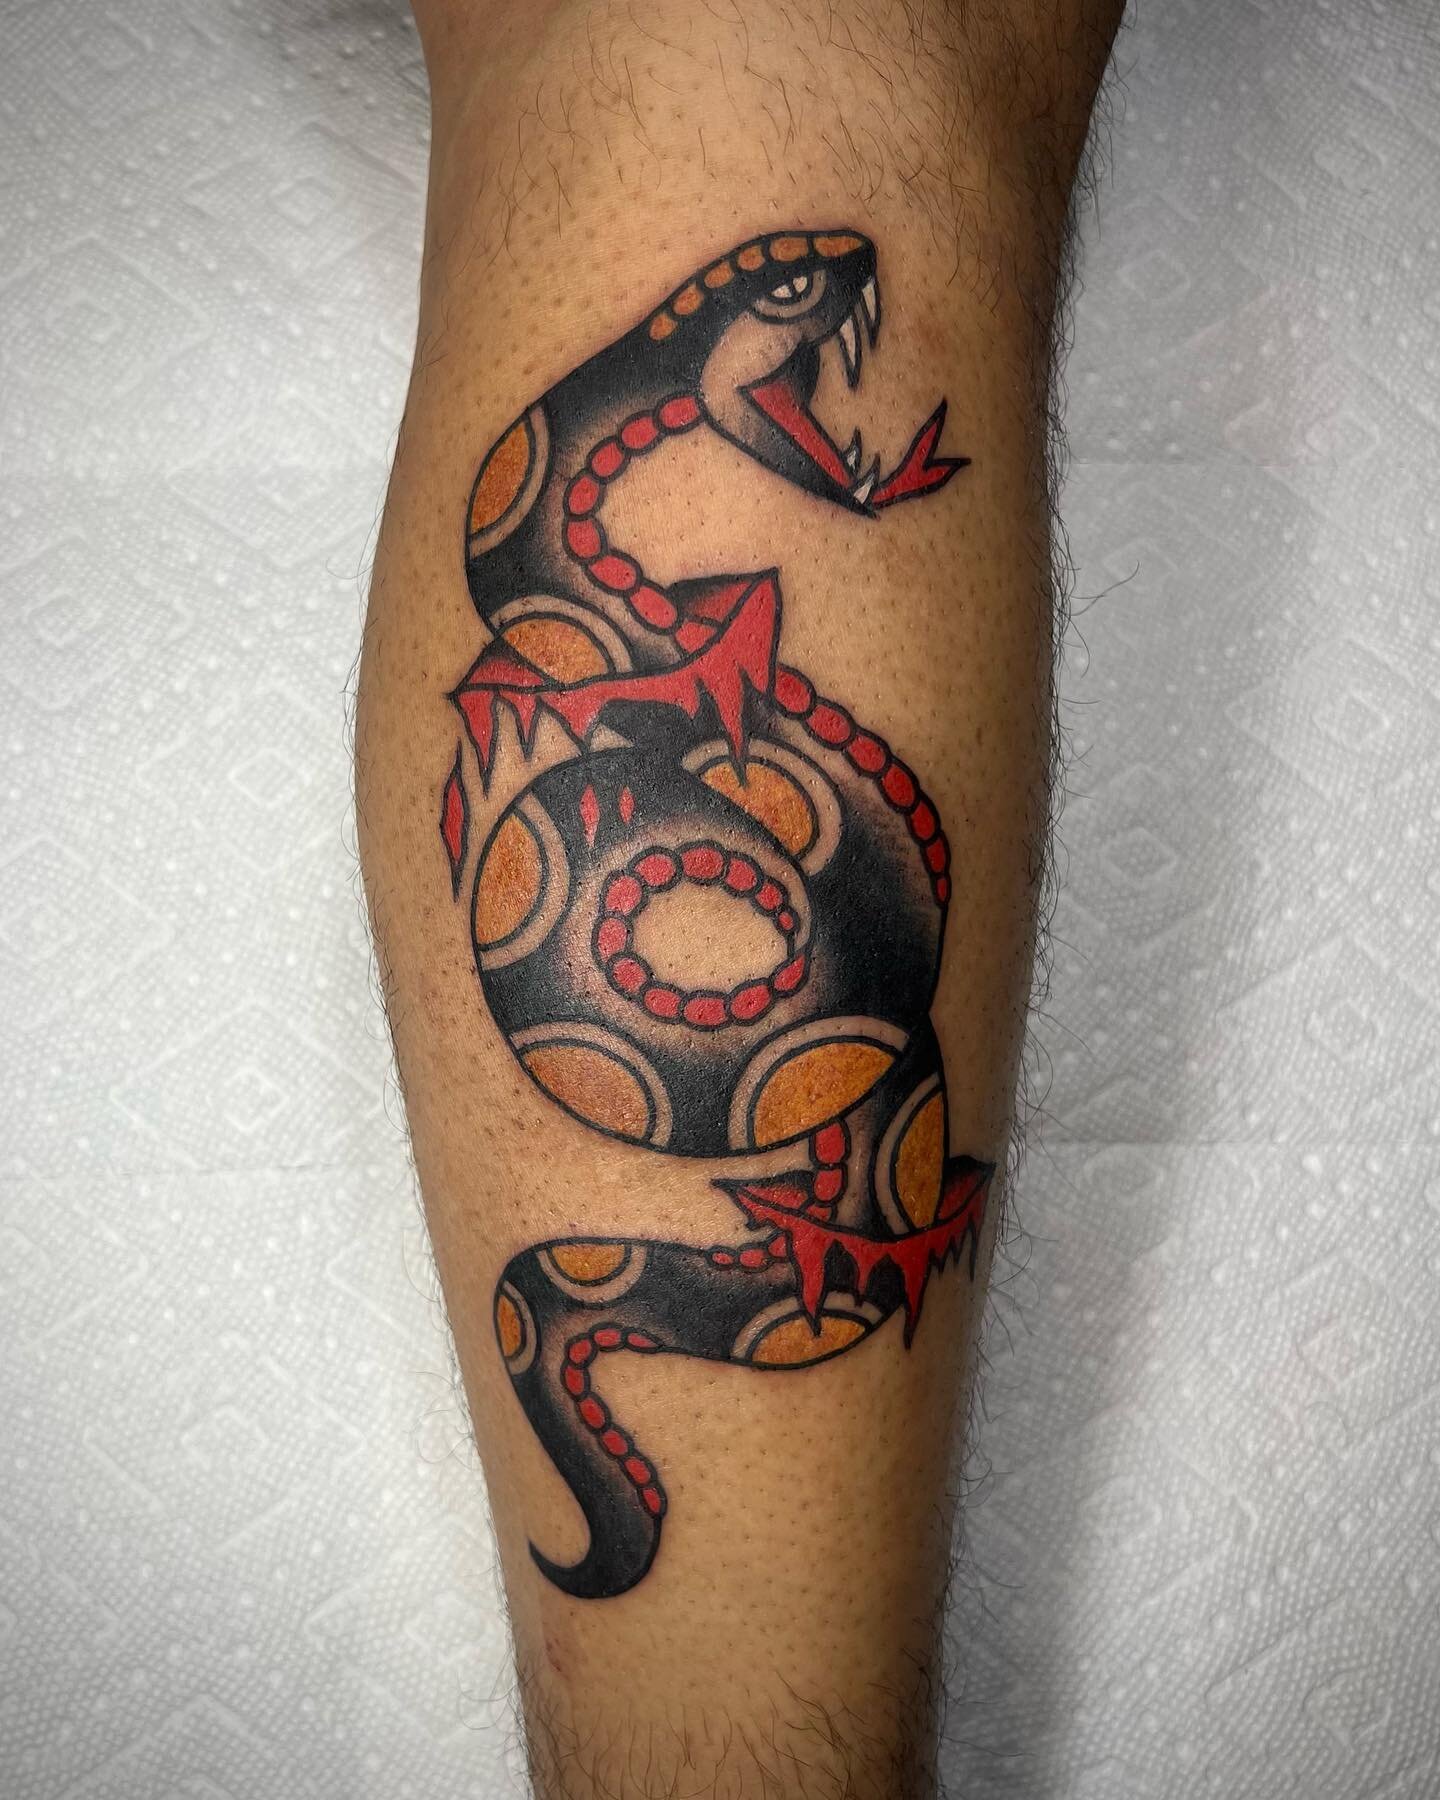 Snake for Matt, thanks for looking.
Time next week, direct message me to book. @victorytattooing